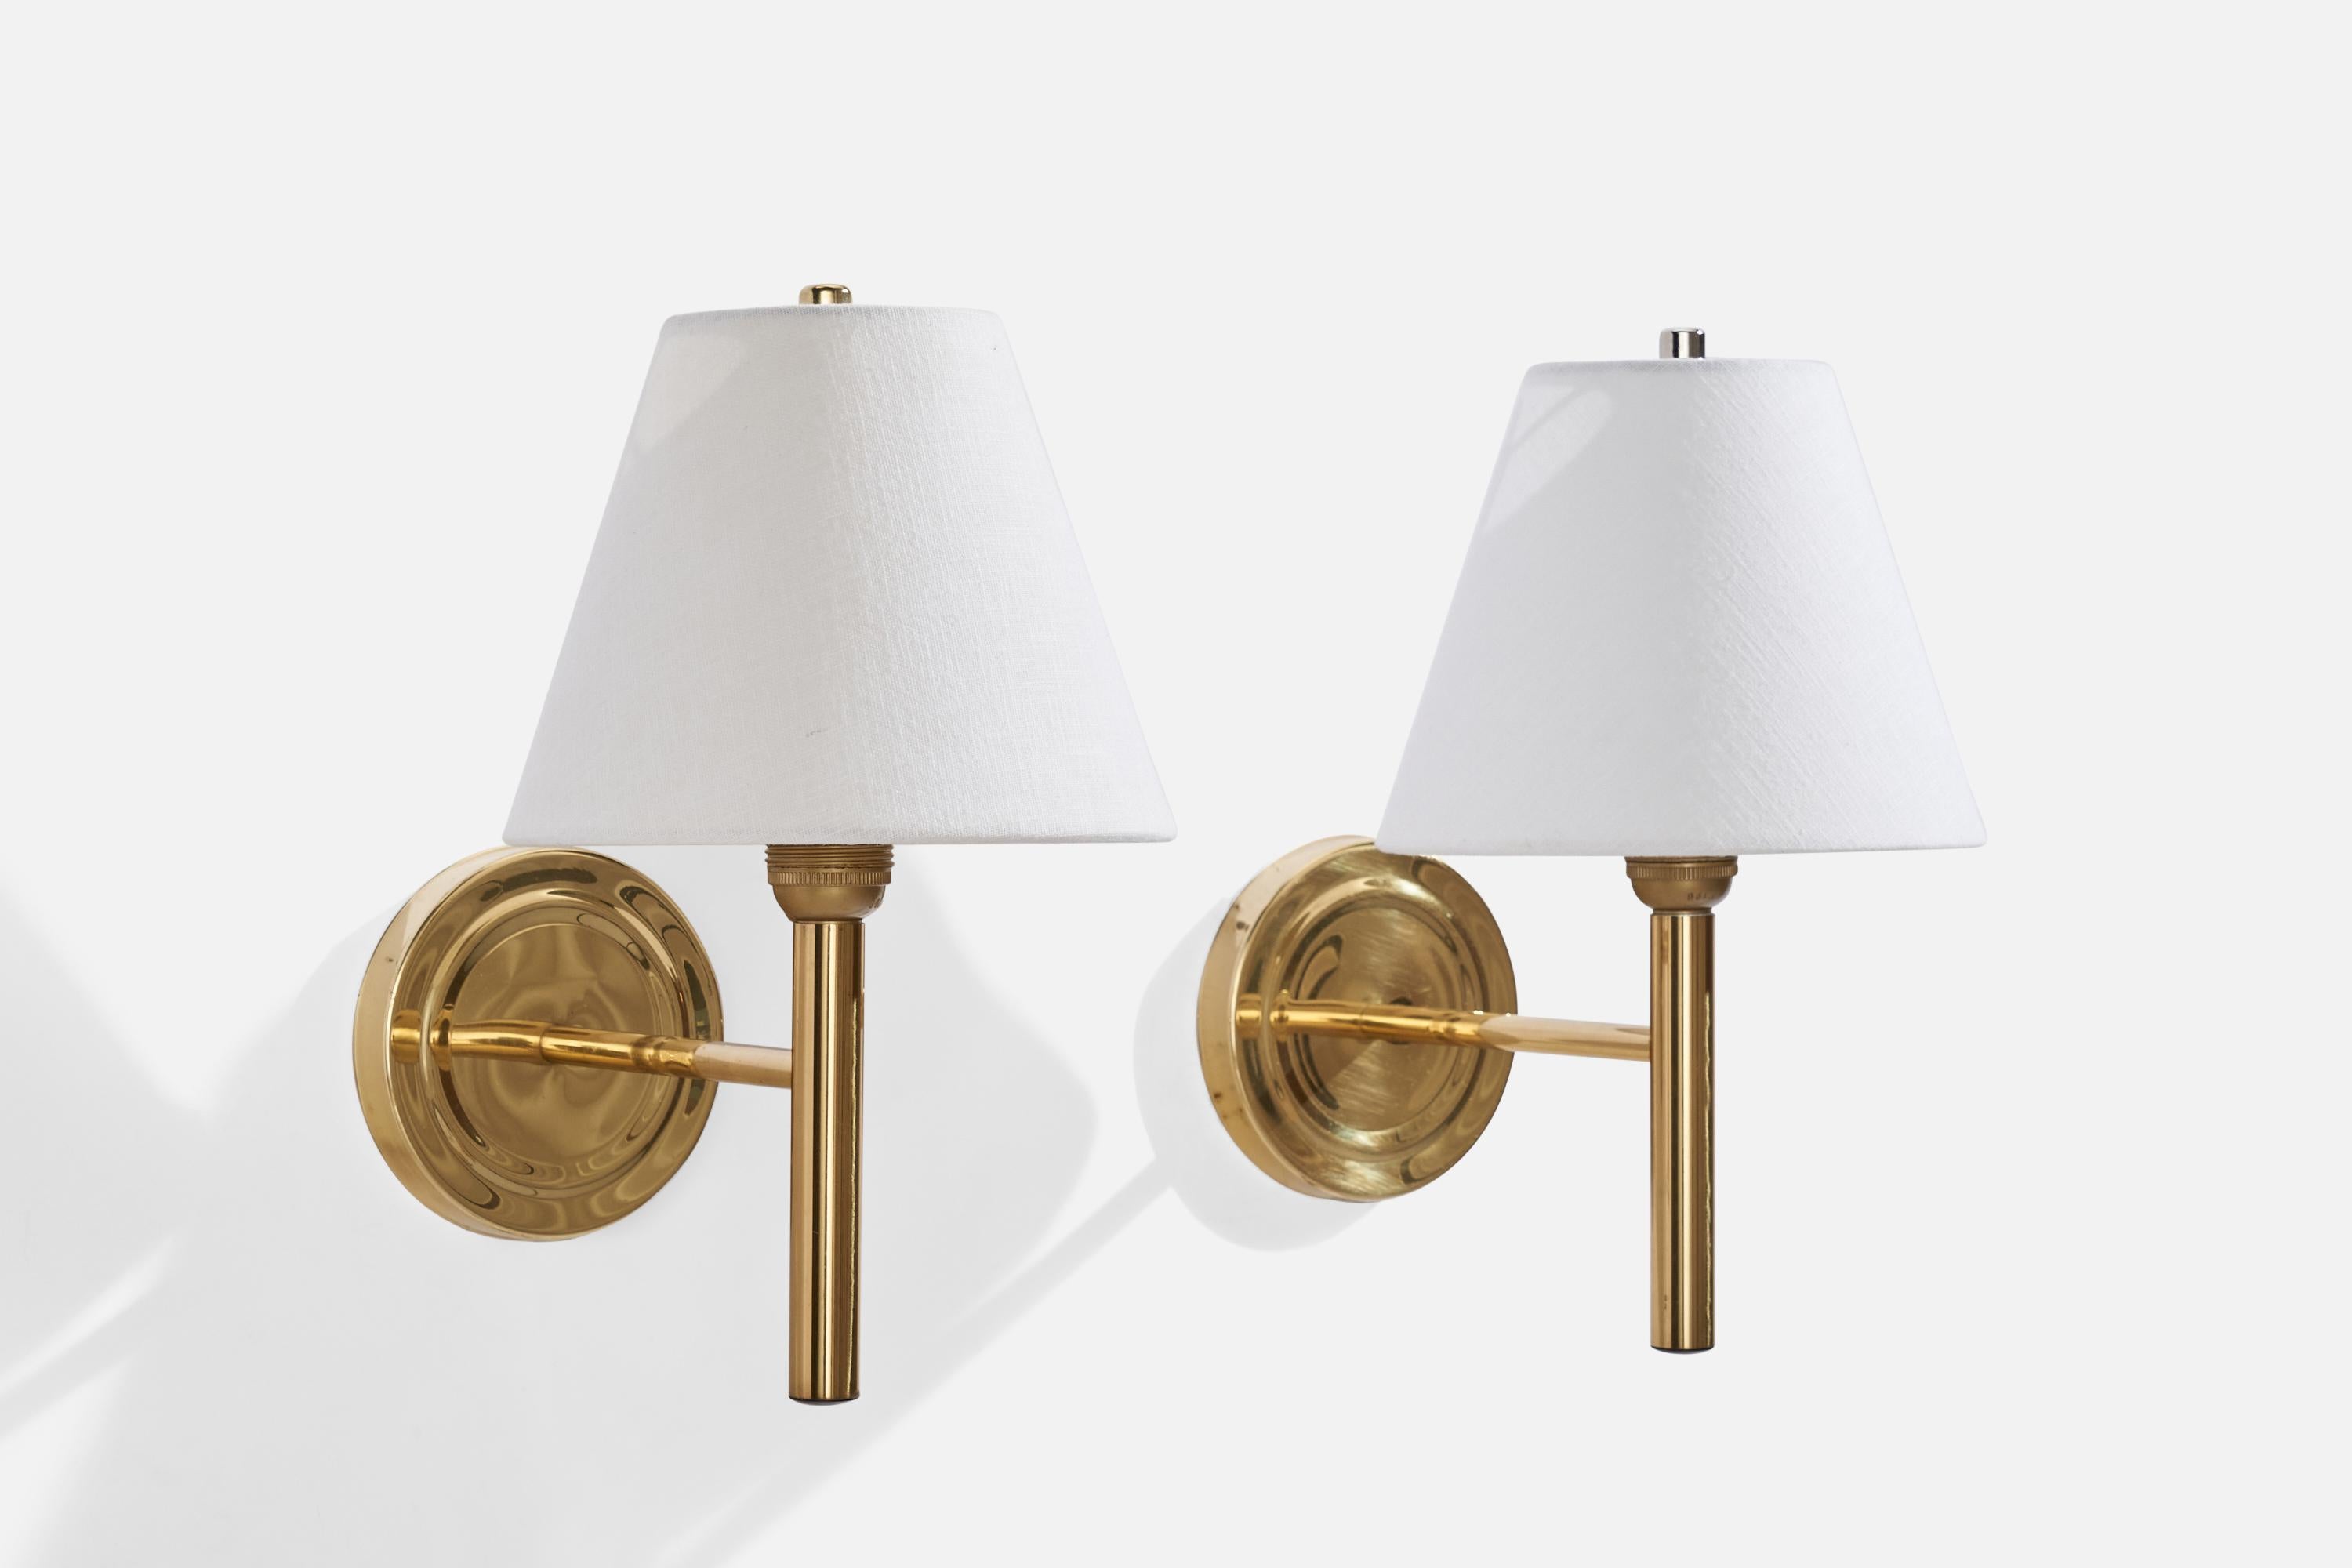 A pair of brass and white fabric wall light produced by Abo Randers, Denmark, c. 1970s.

Overall Dimensions (inches): 13” H x 8” W x 11” D
Back Plate Dimensions (inches): 5.14” H x 0.75” D
Bulb Specifications: E-26 Bulb
Number of Sockets: 2
All